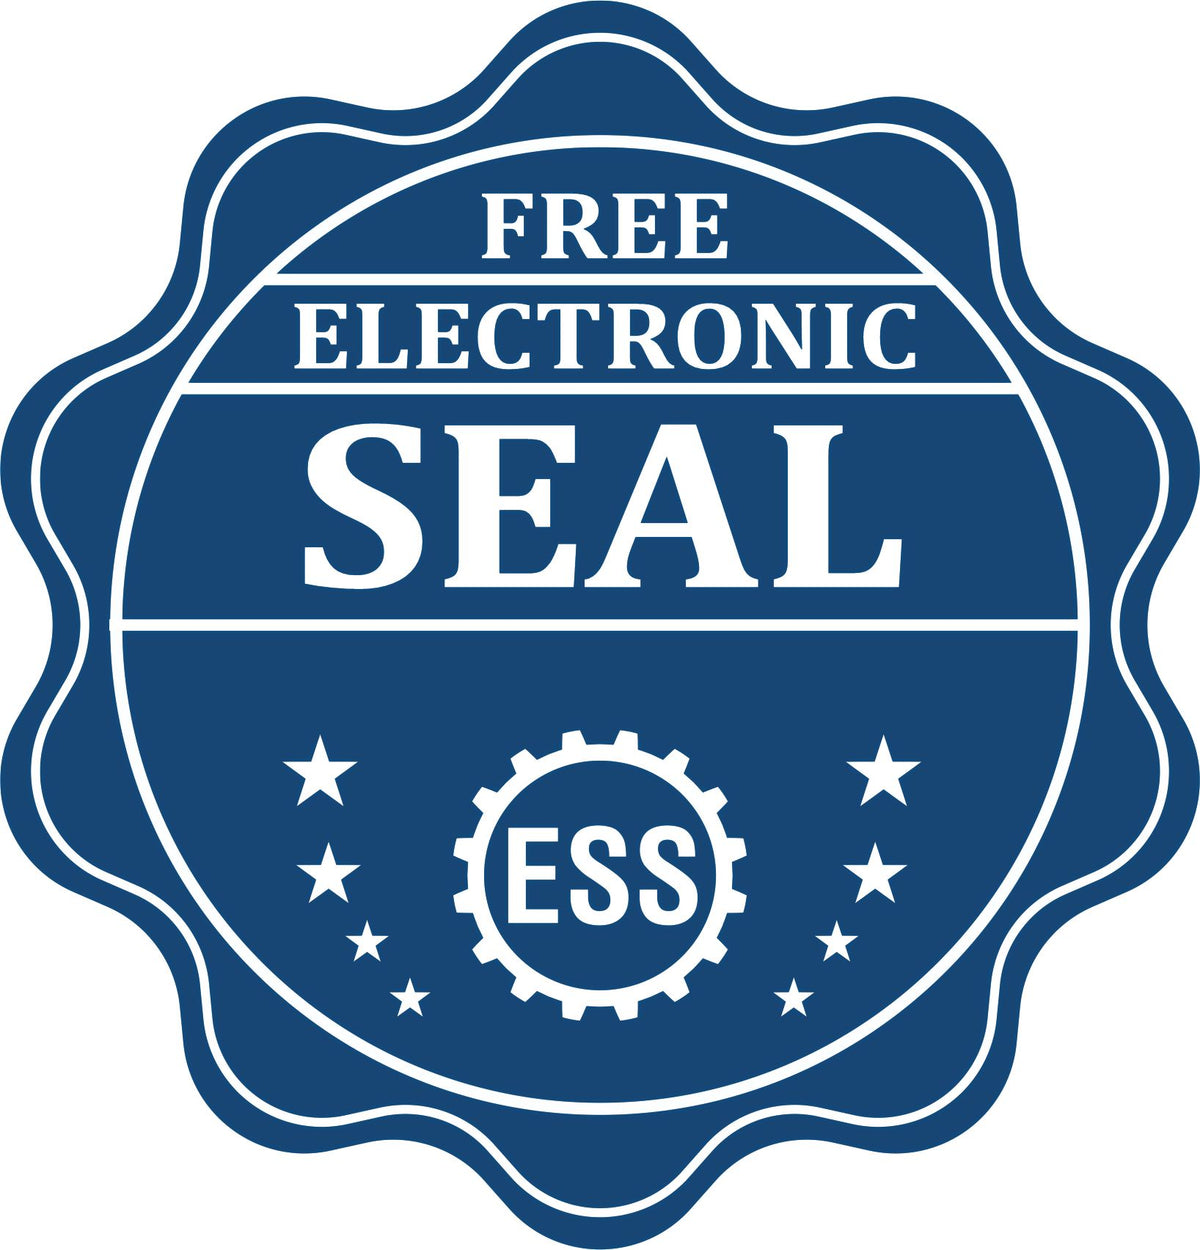 A badge showing a free electronic seal for the Gift Texas Land Surveyor Seal with stars and the ESS gear on the emblem.